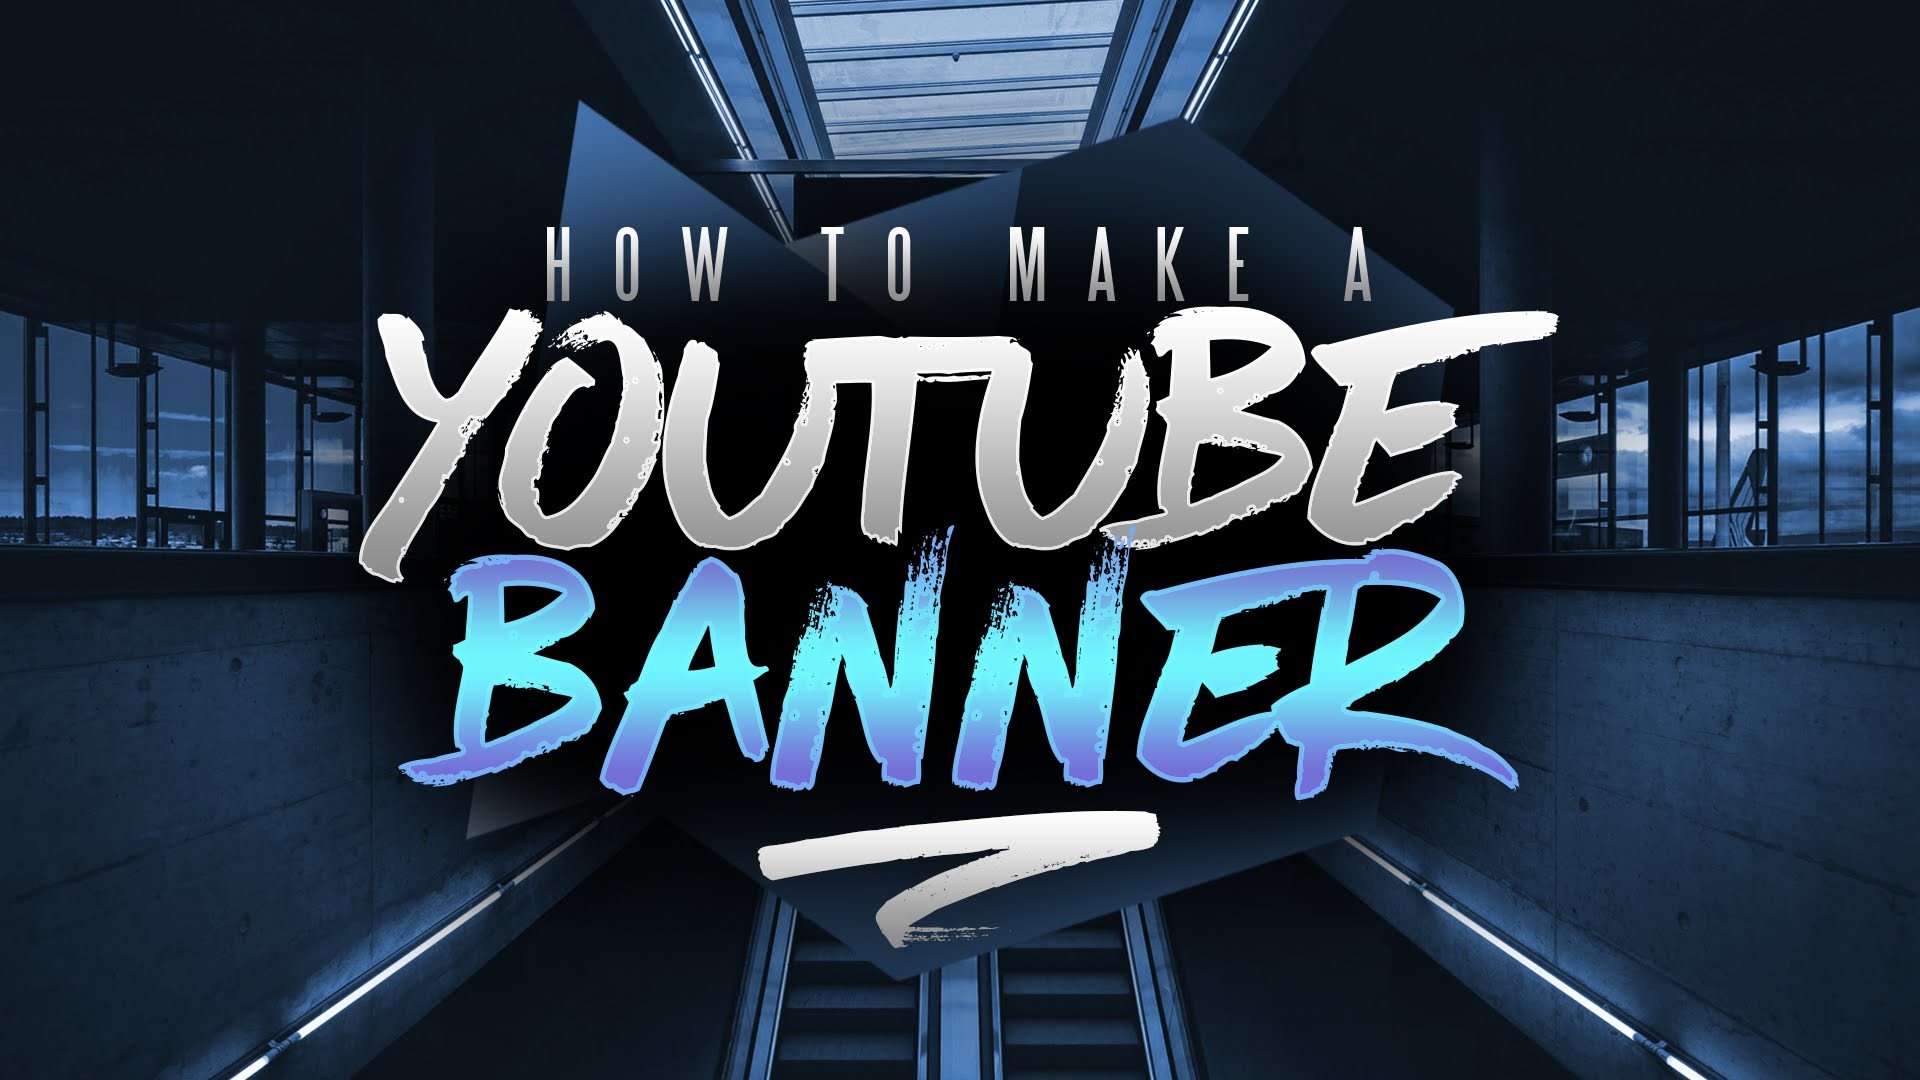 1920x1080 How to Make a YouTube Banner in Photoshop! Channel Art Tutorial (2016/2017)  - YouTube